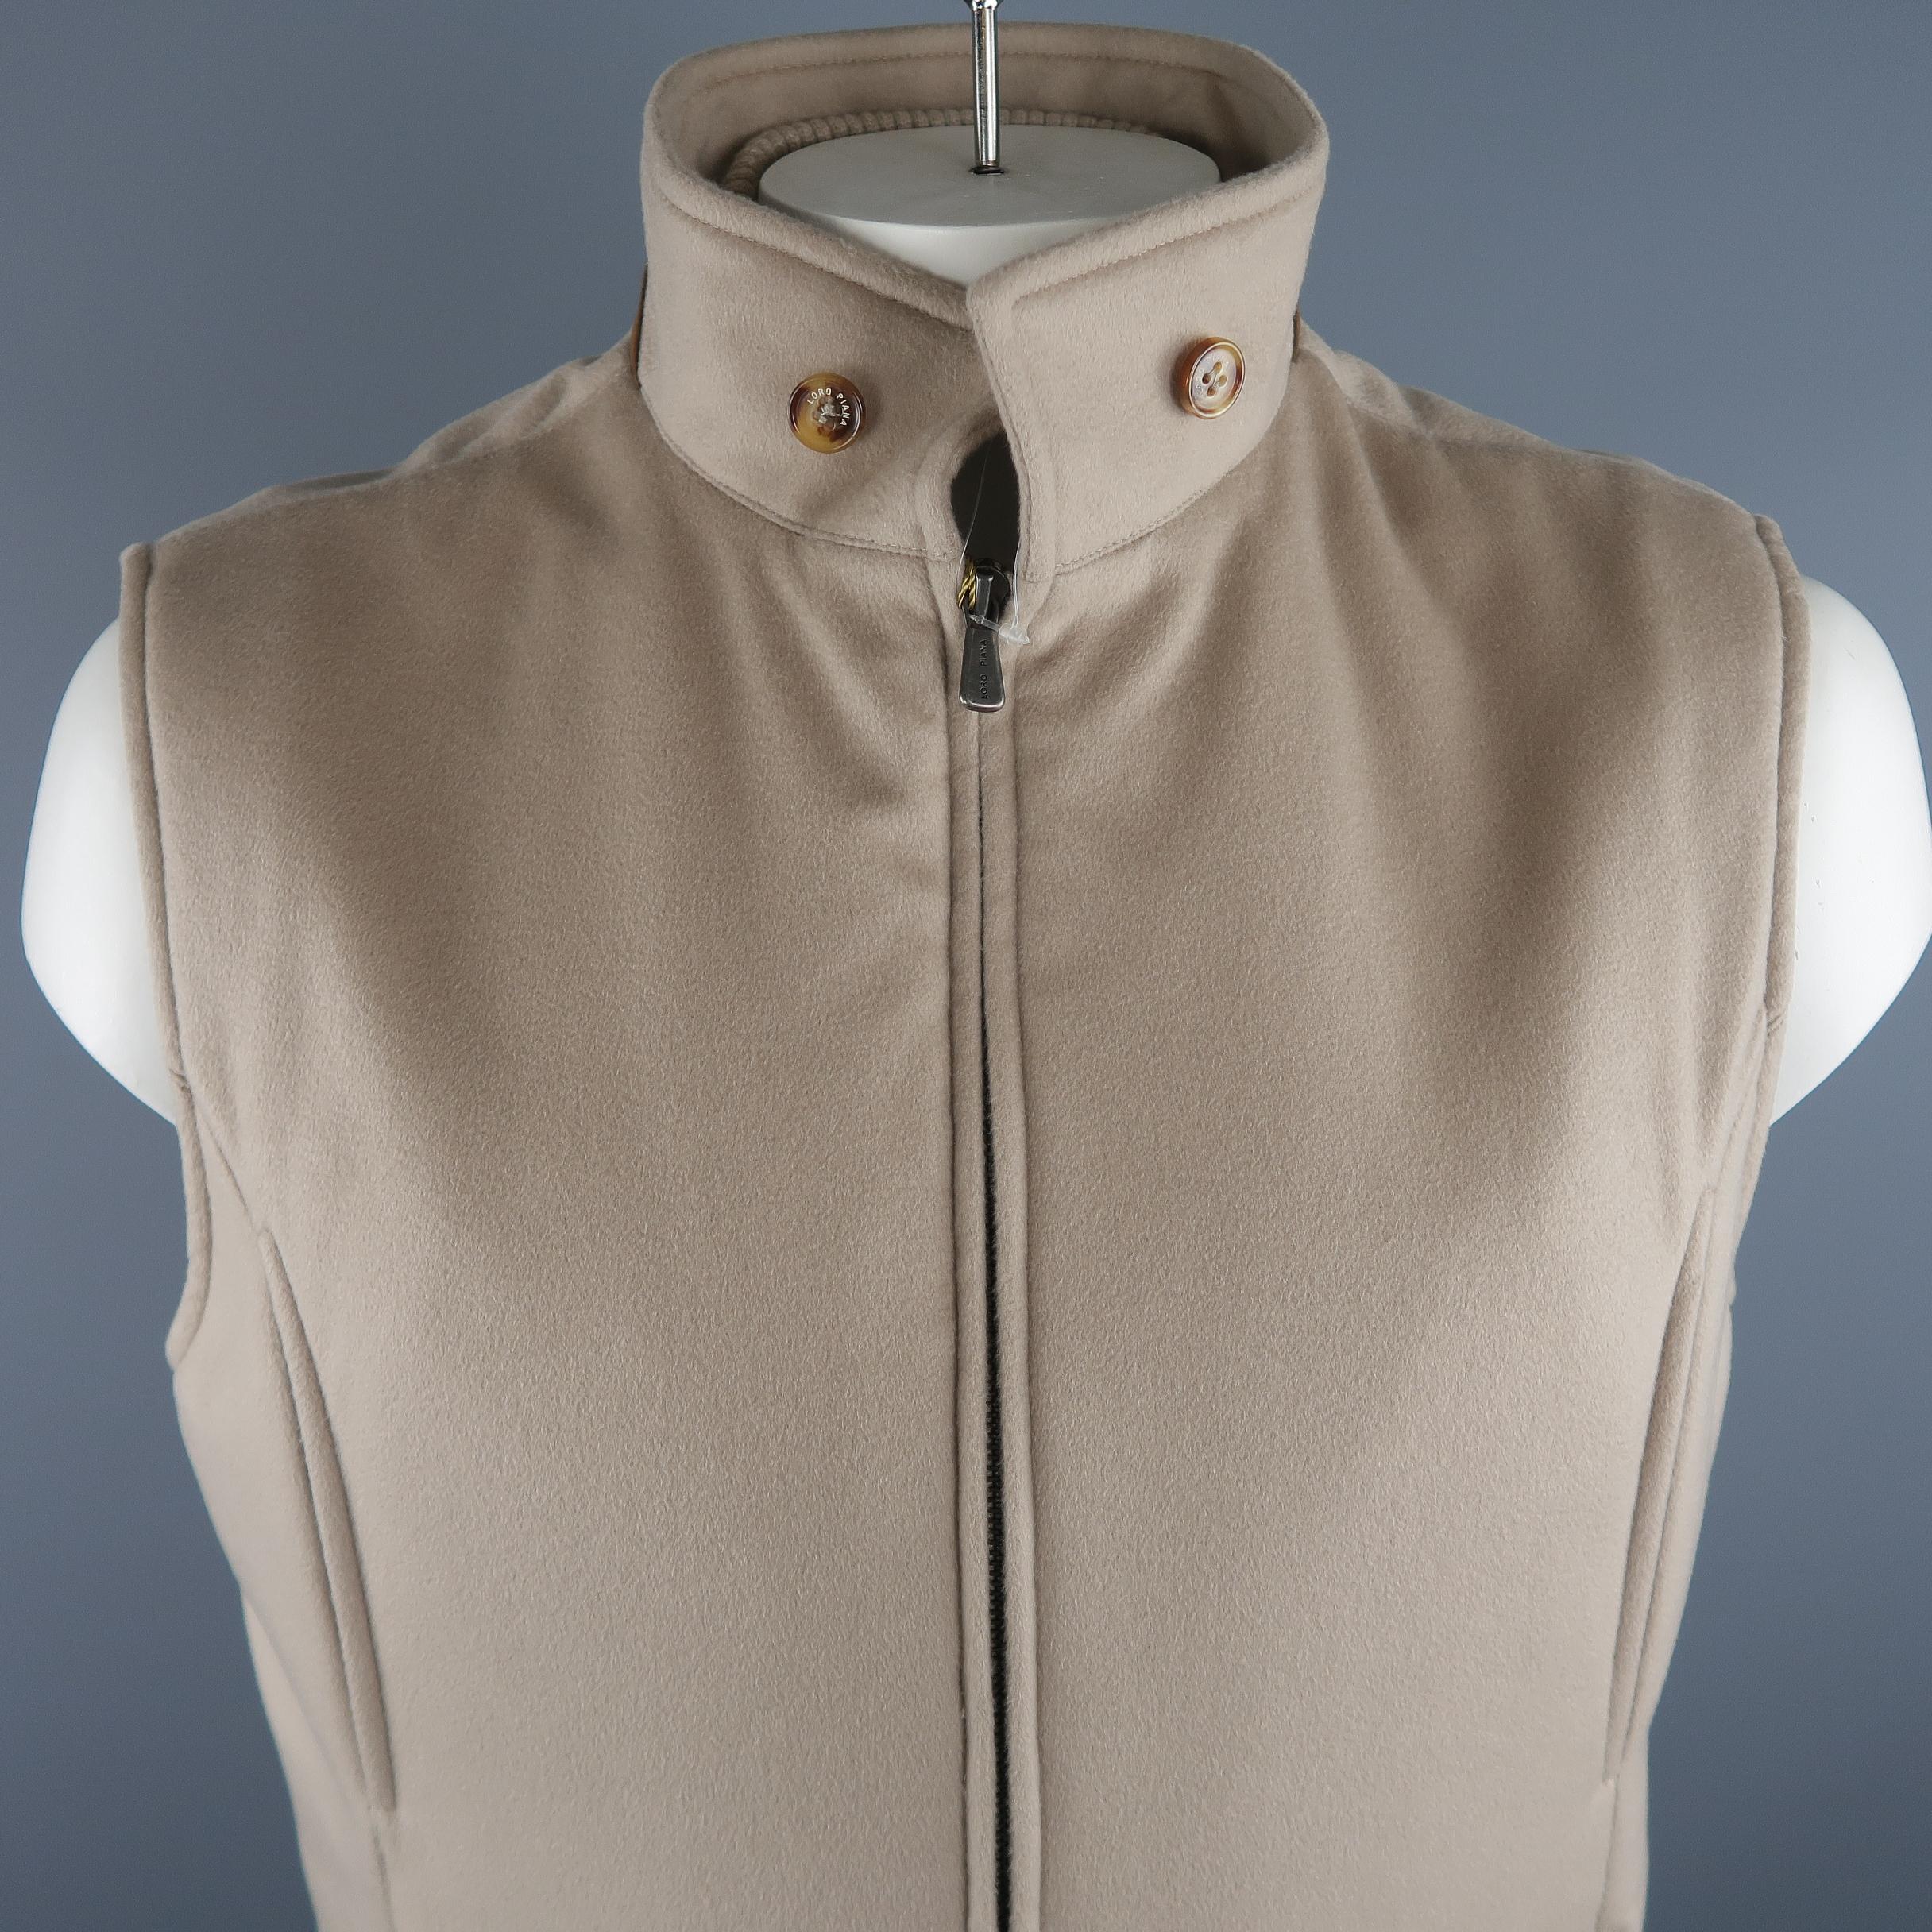 LORO PIANA vest comes in oatmeal solid cashmere material, buttons and suede trim on the collar, zip up, slit and zip pockets. Made in Italy.
 
New with Tags.
Marked: XL IT
 
Measurements:
 
Shoulder: 18 in.
Chest: 48 in.
Length: 29 in